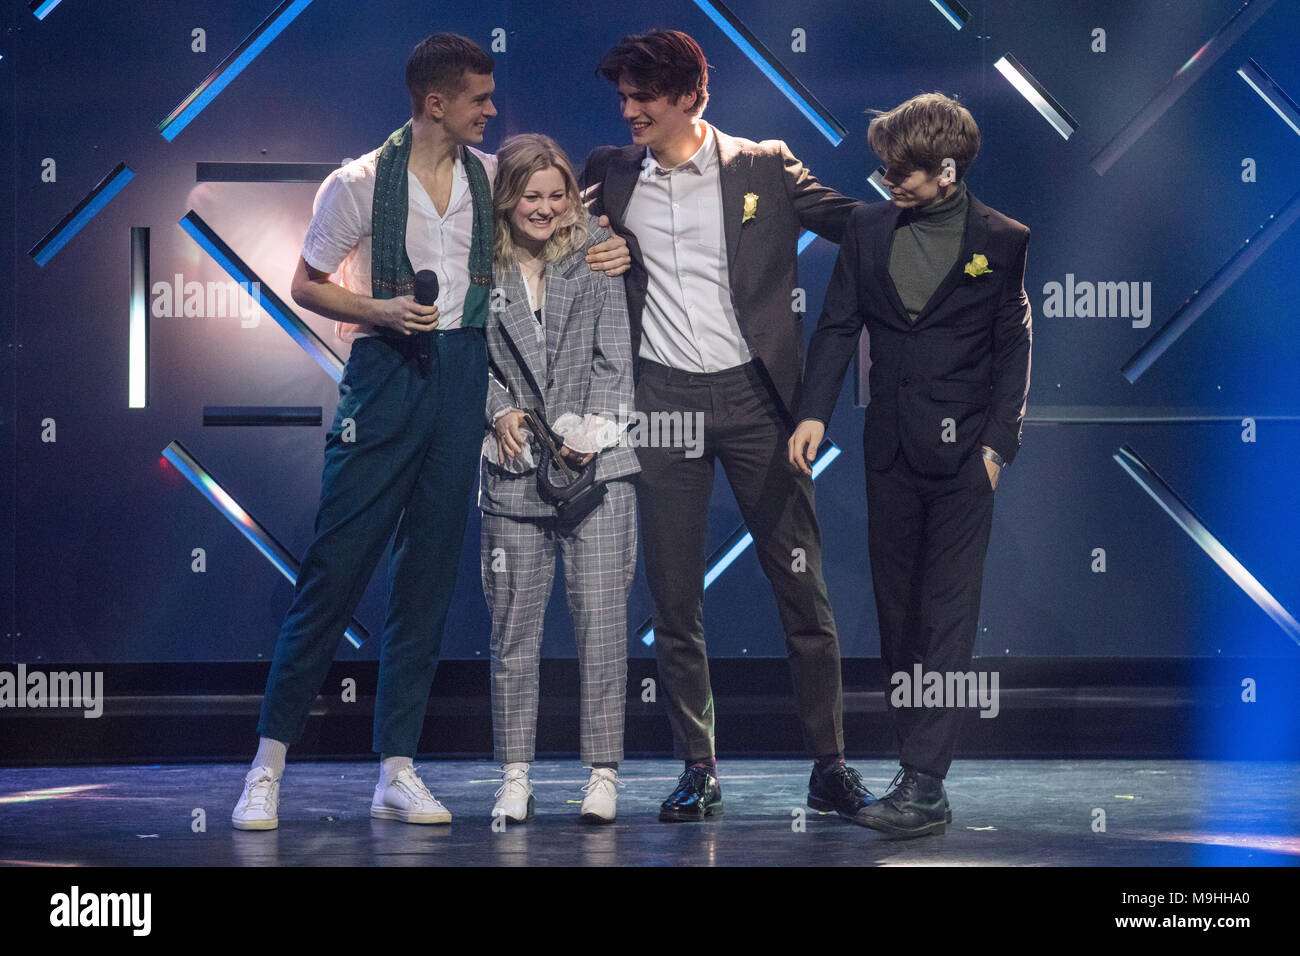 Norway, Oslo - February 25, 2018. The Norwegian pop-rock band Sløtface  receives the award for Best Rock during the Norwegian Grammy Awards,  Spellemannprisen 2017, at Oslo Konserthus in Oslo. (Photo credit: Gonzales